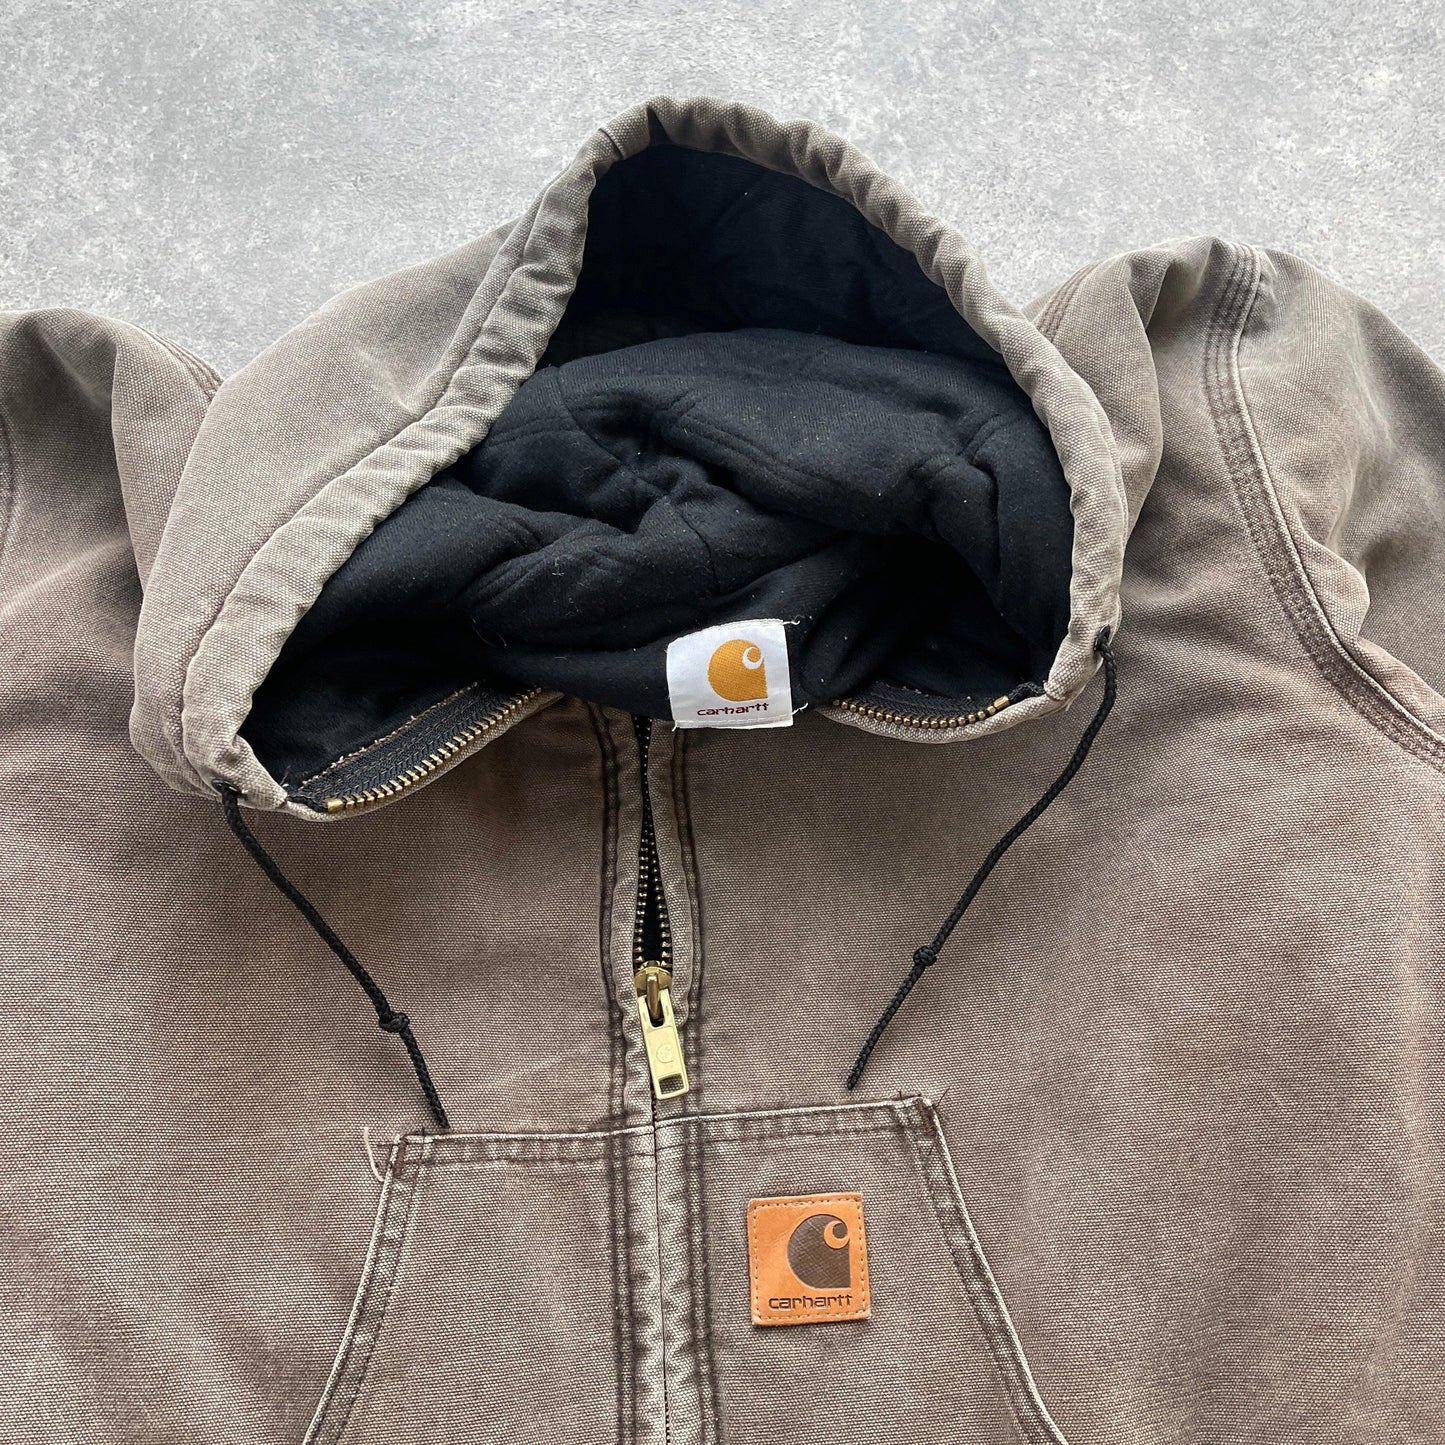 Carhartt 2000s heavyweight active jacket (L) - Known Source